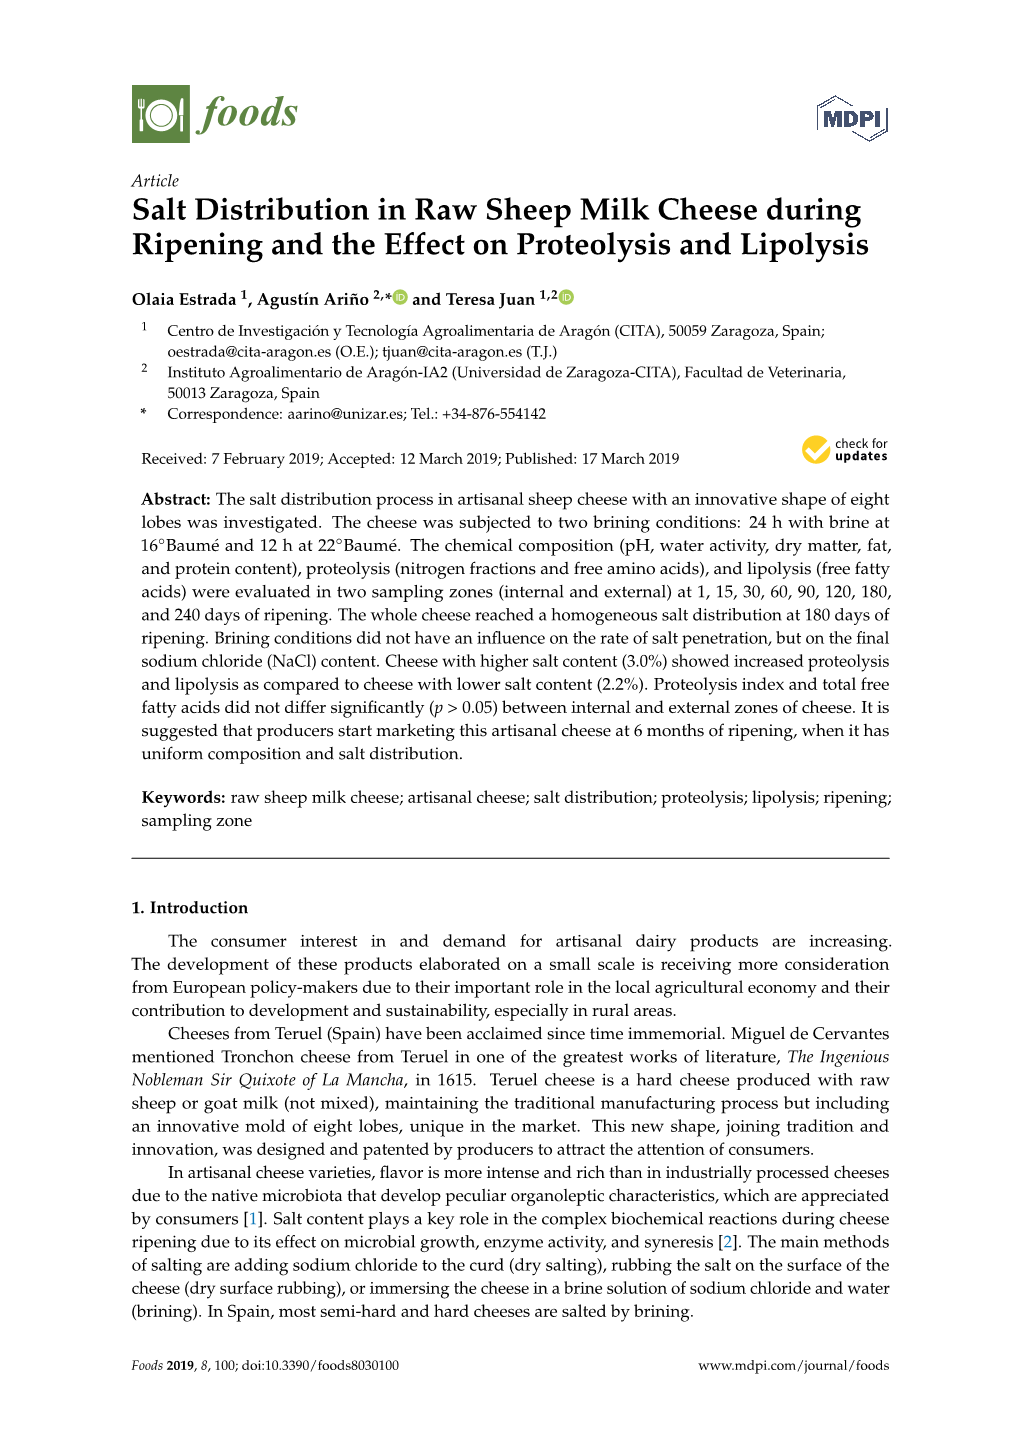 Salt Distribution in Raw Sheep Milk Cheese During Ripening and the Effect on Proteolysis and Lipolysis